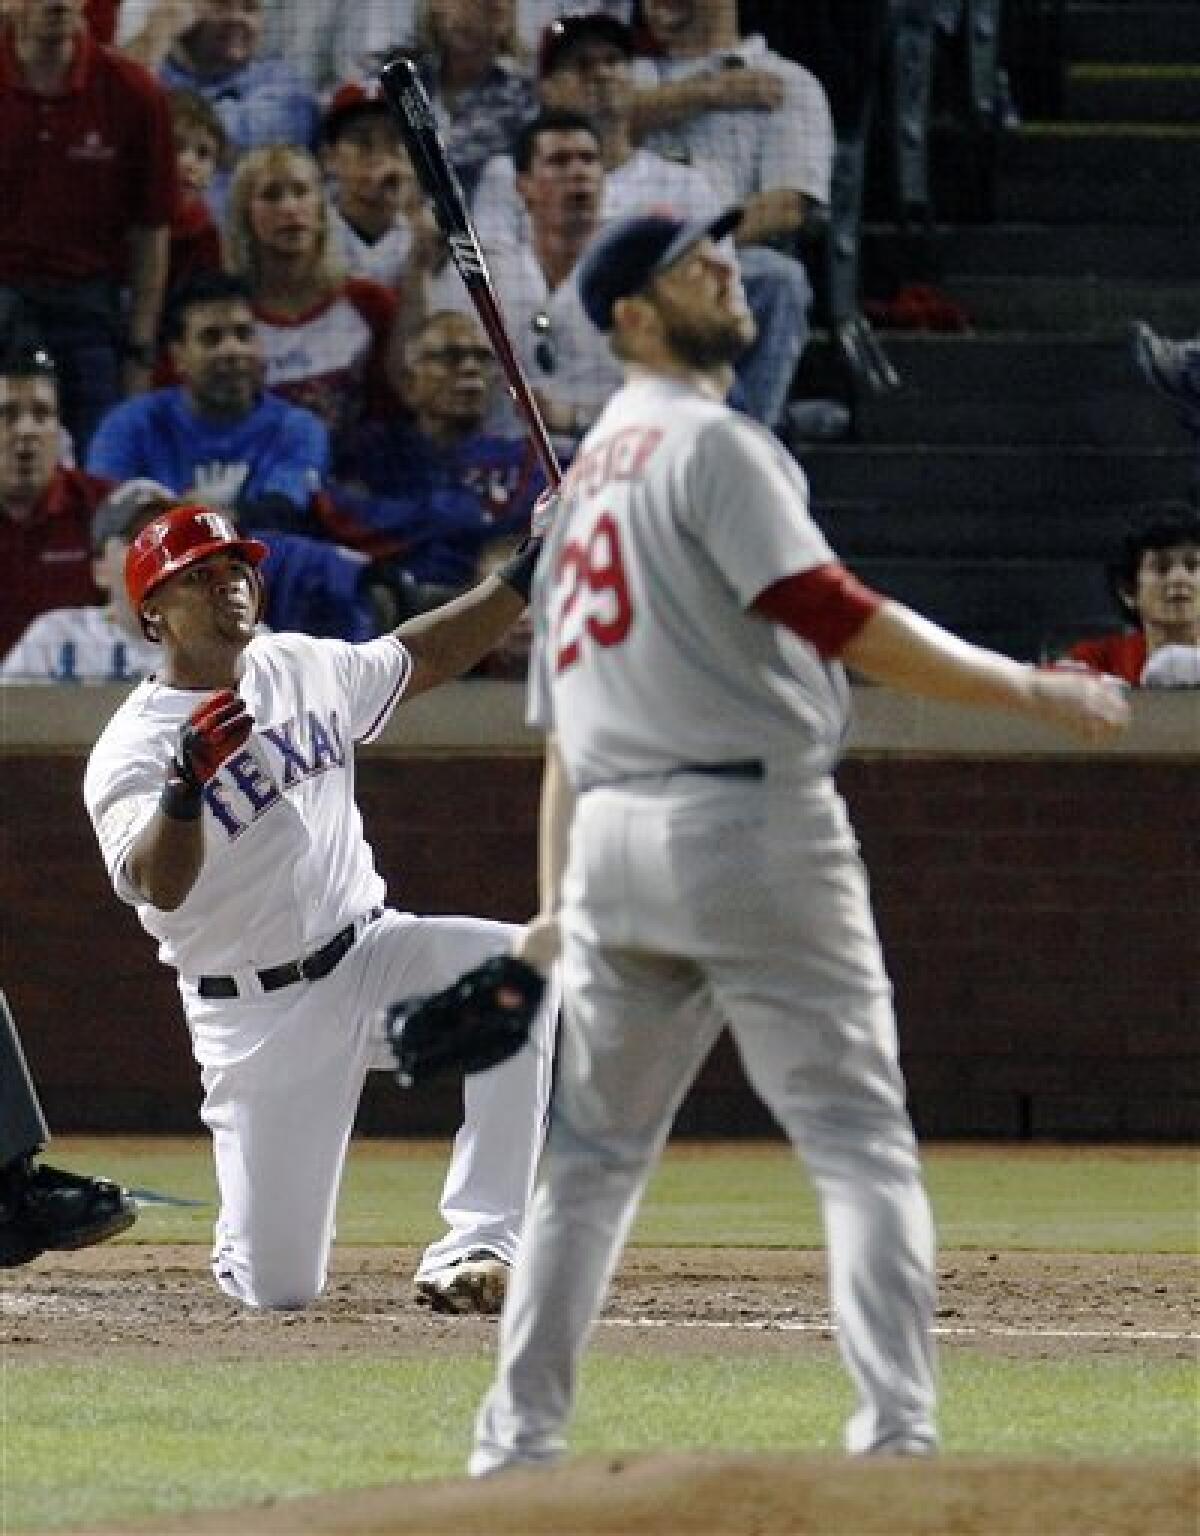 Game 5: Beltre homers in 6th, score tied 2-all - The San Diego Union-Tribune